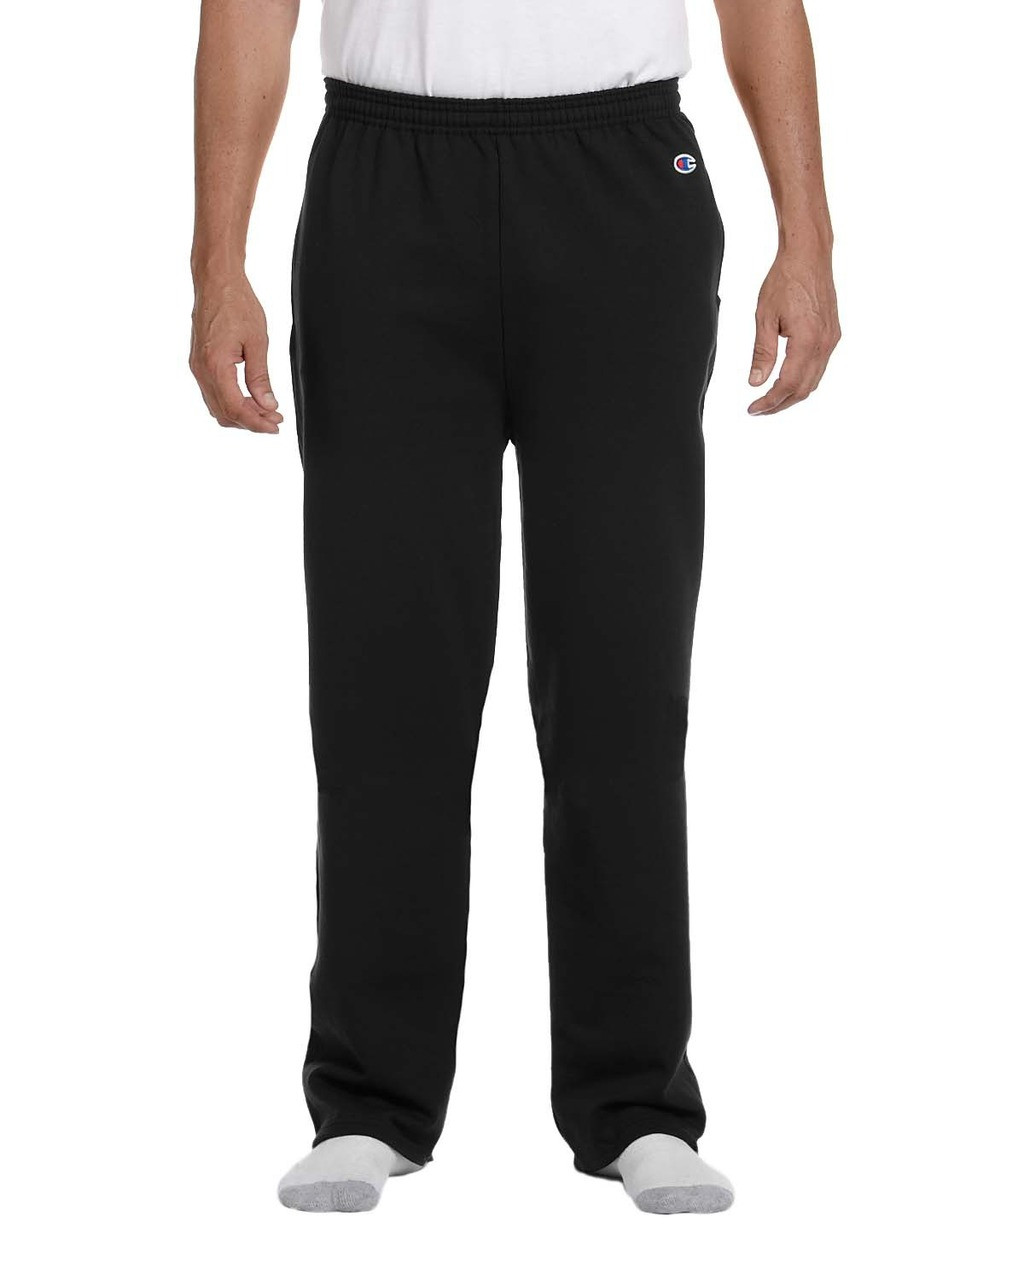 Champion P800 Adult 9 oz OpenBottom Fleece Pant with Pockets